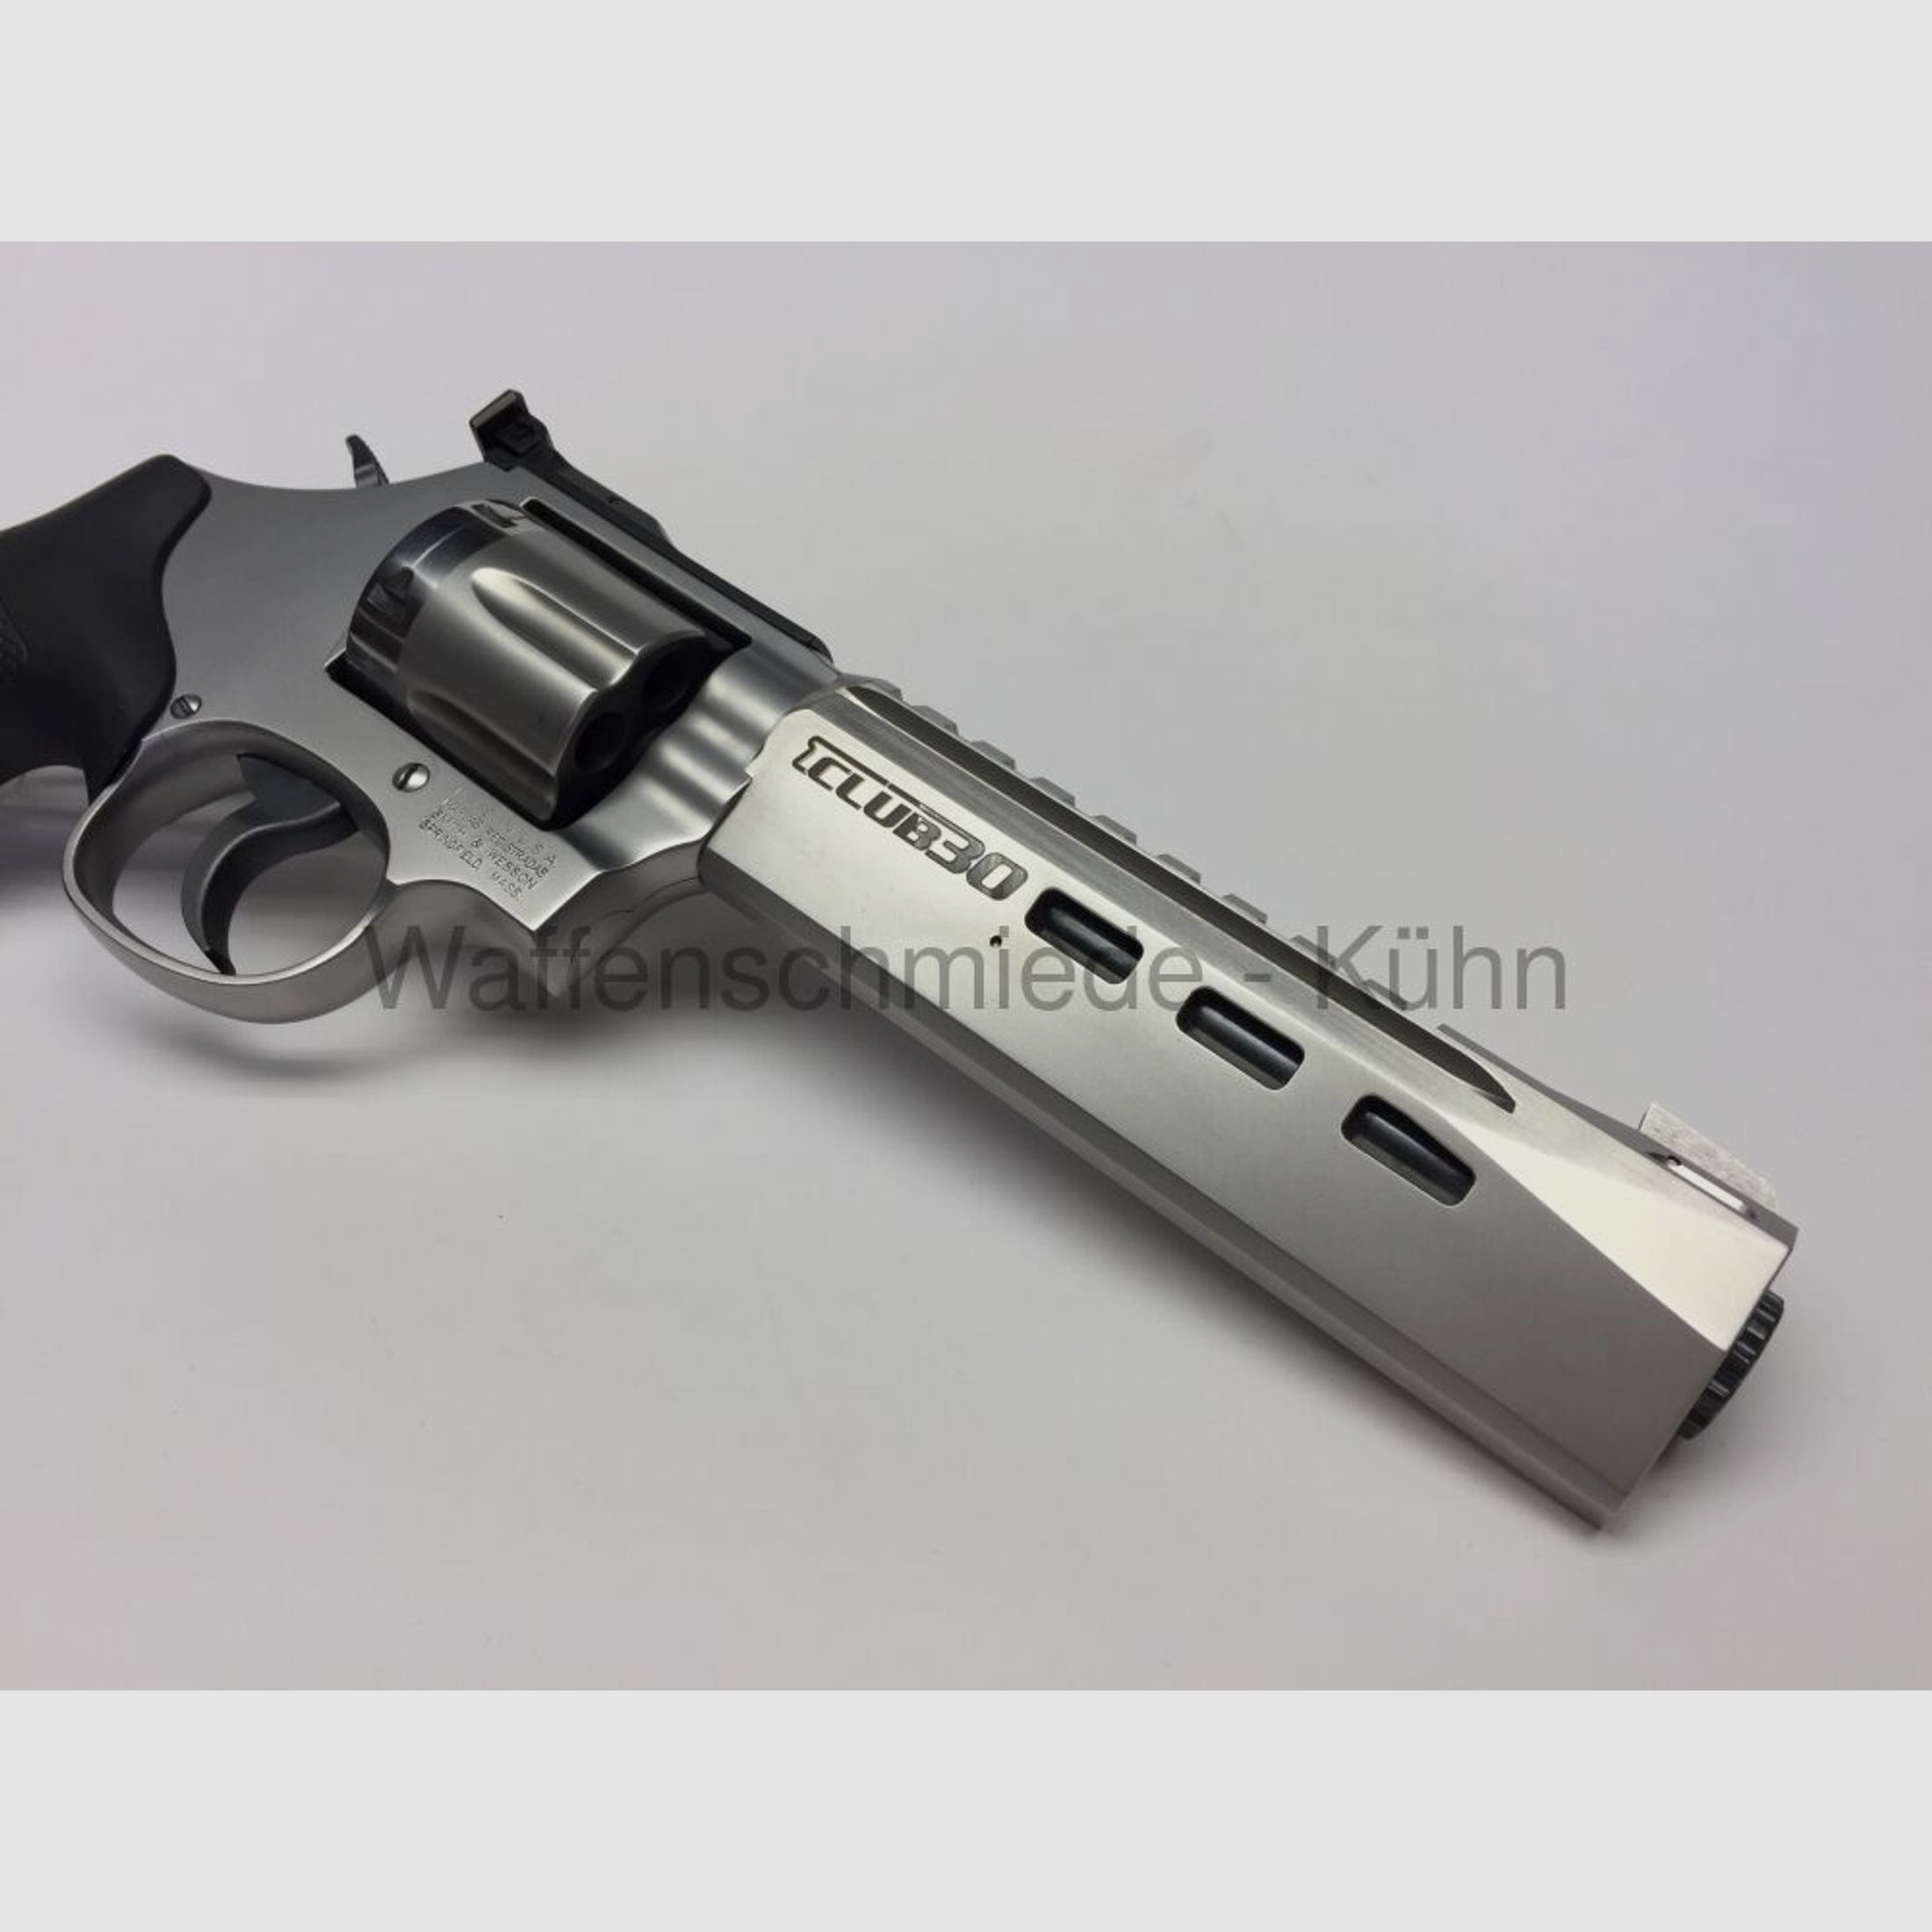 Smith & Wesson	 Supertarget / Club 30